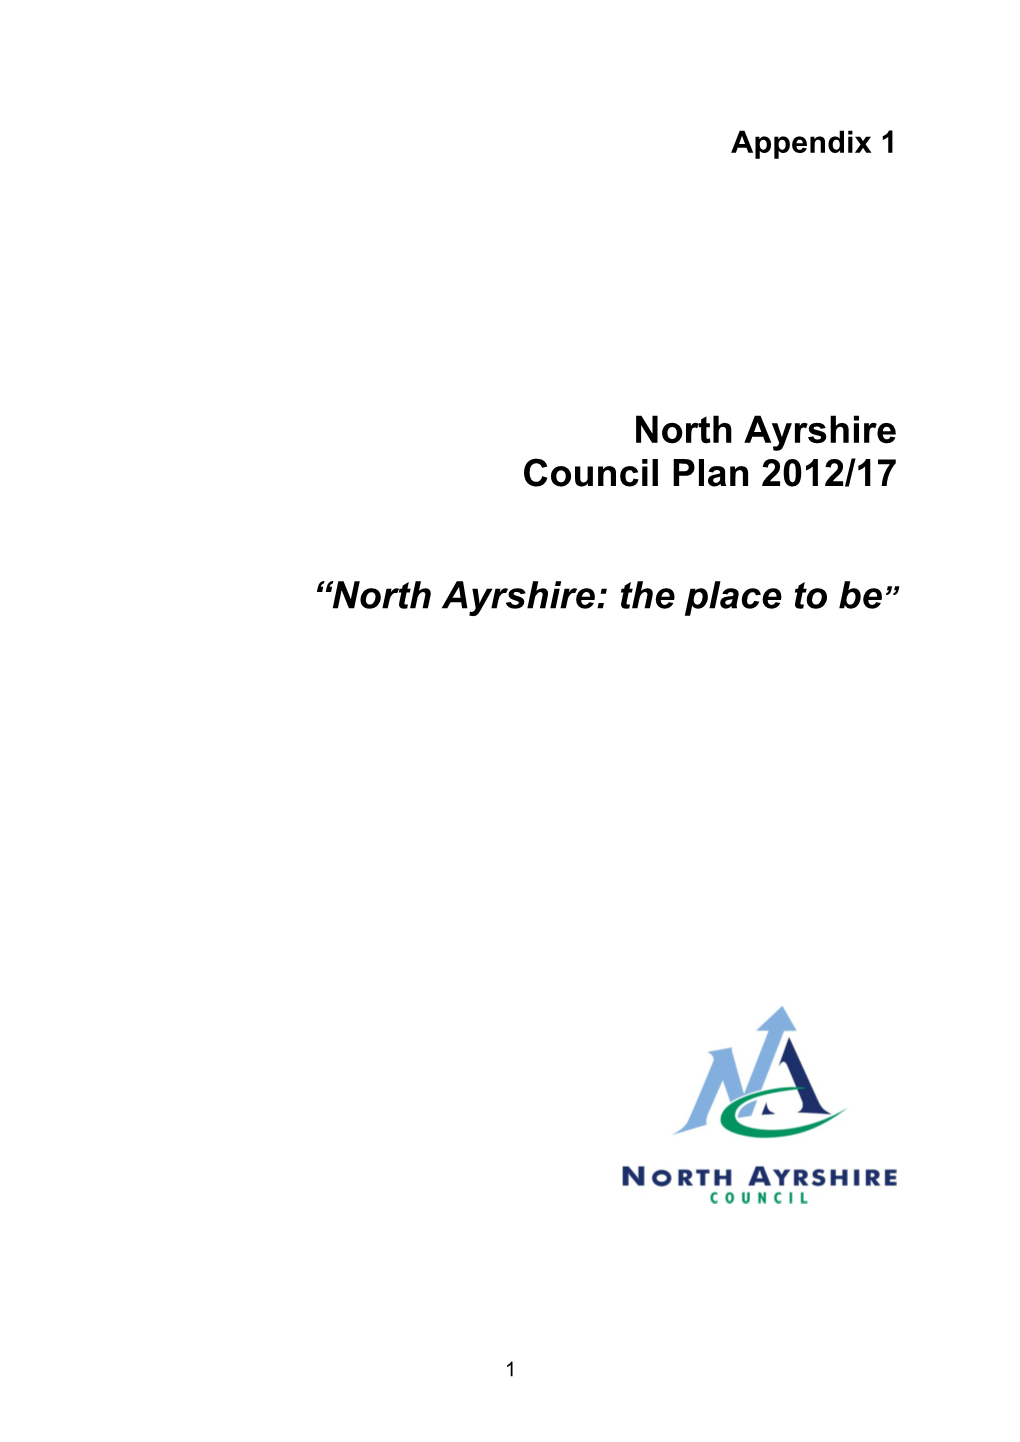 North Ayrshire: the Place to Be”